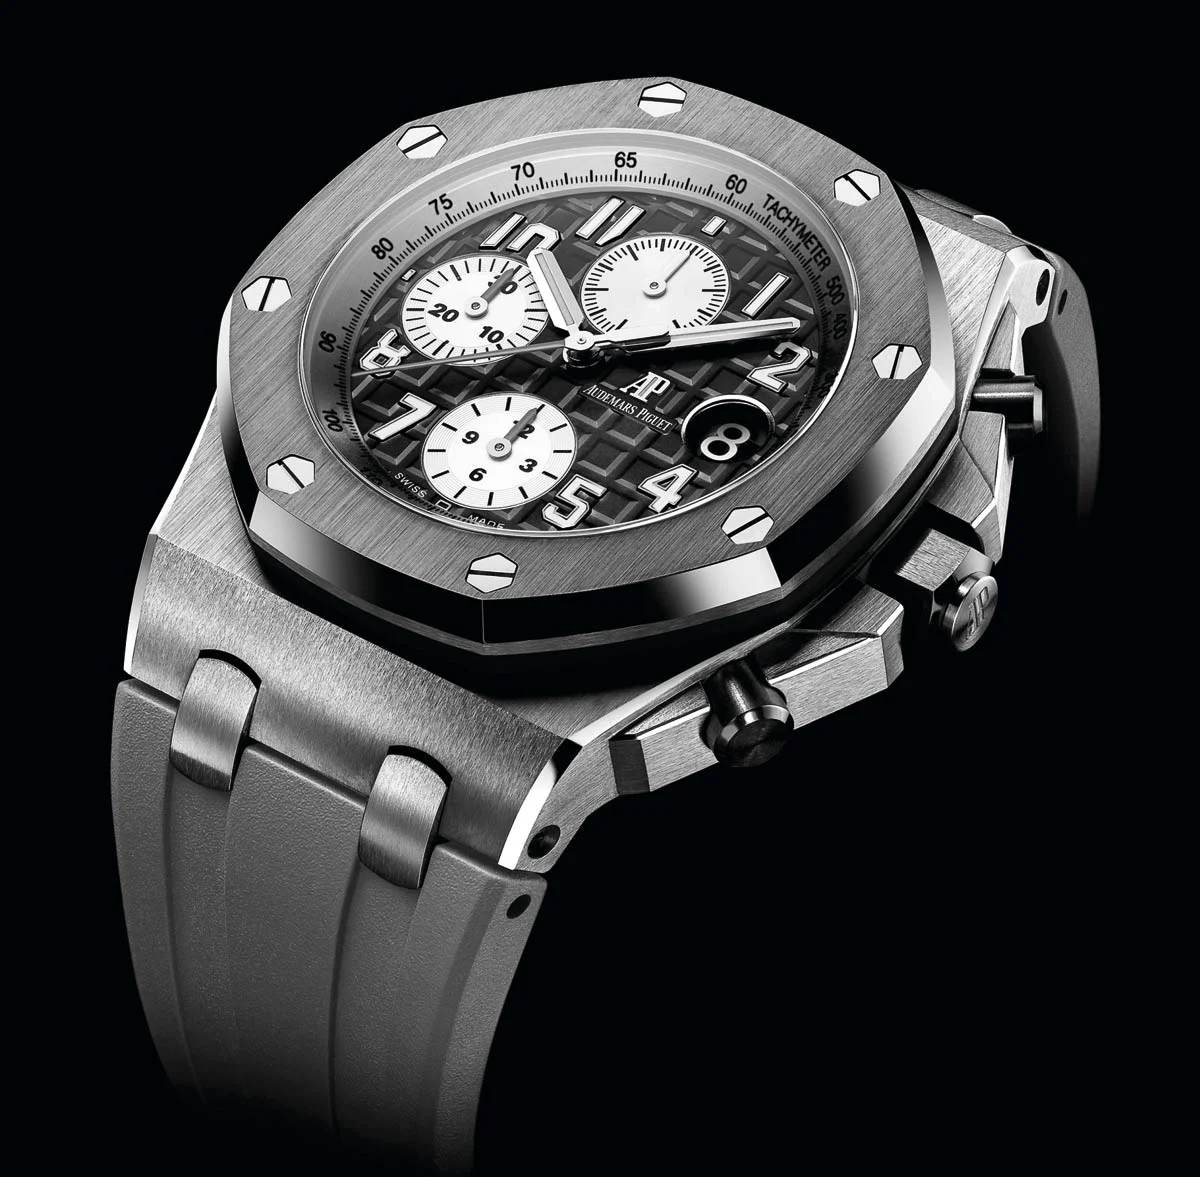 SIHH 2018: Audemars Piguet - Royal Oak Offshore Chronograph, new 2018  models | Time and Watches | The watch blog